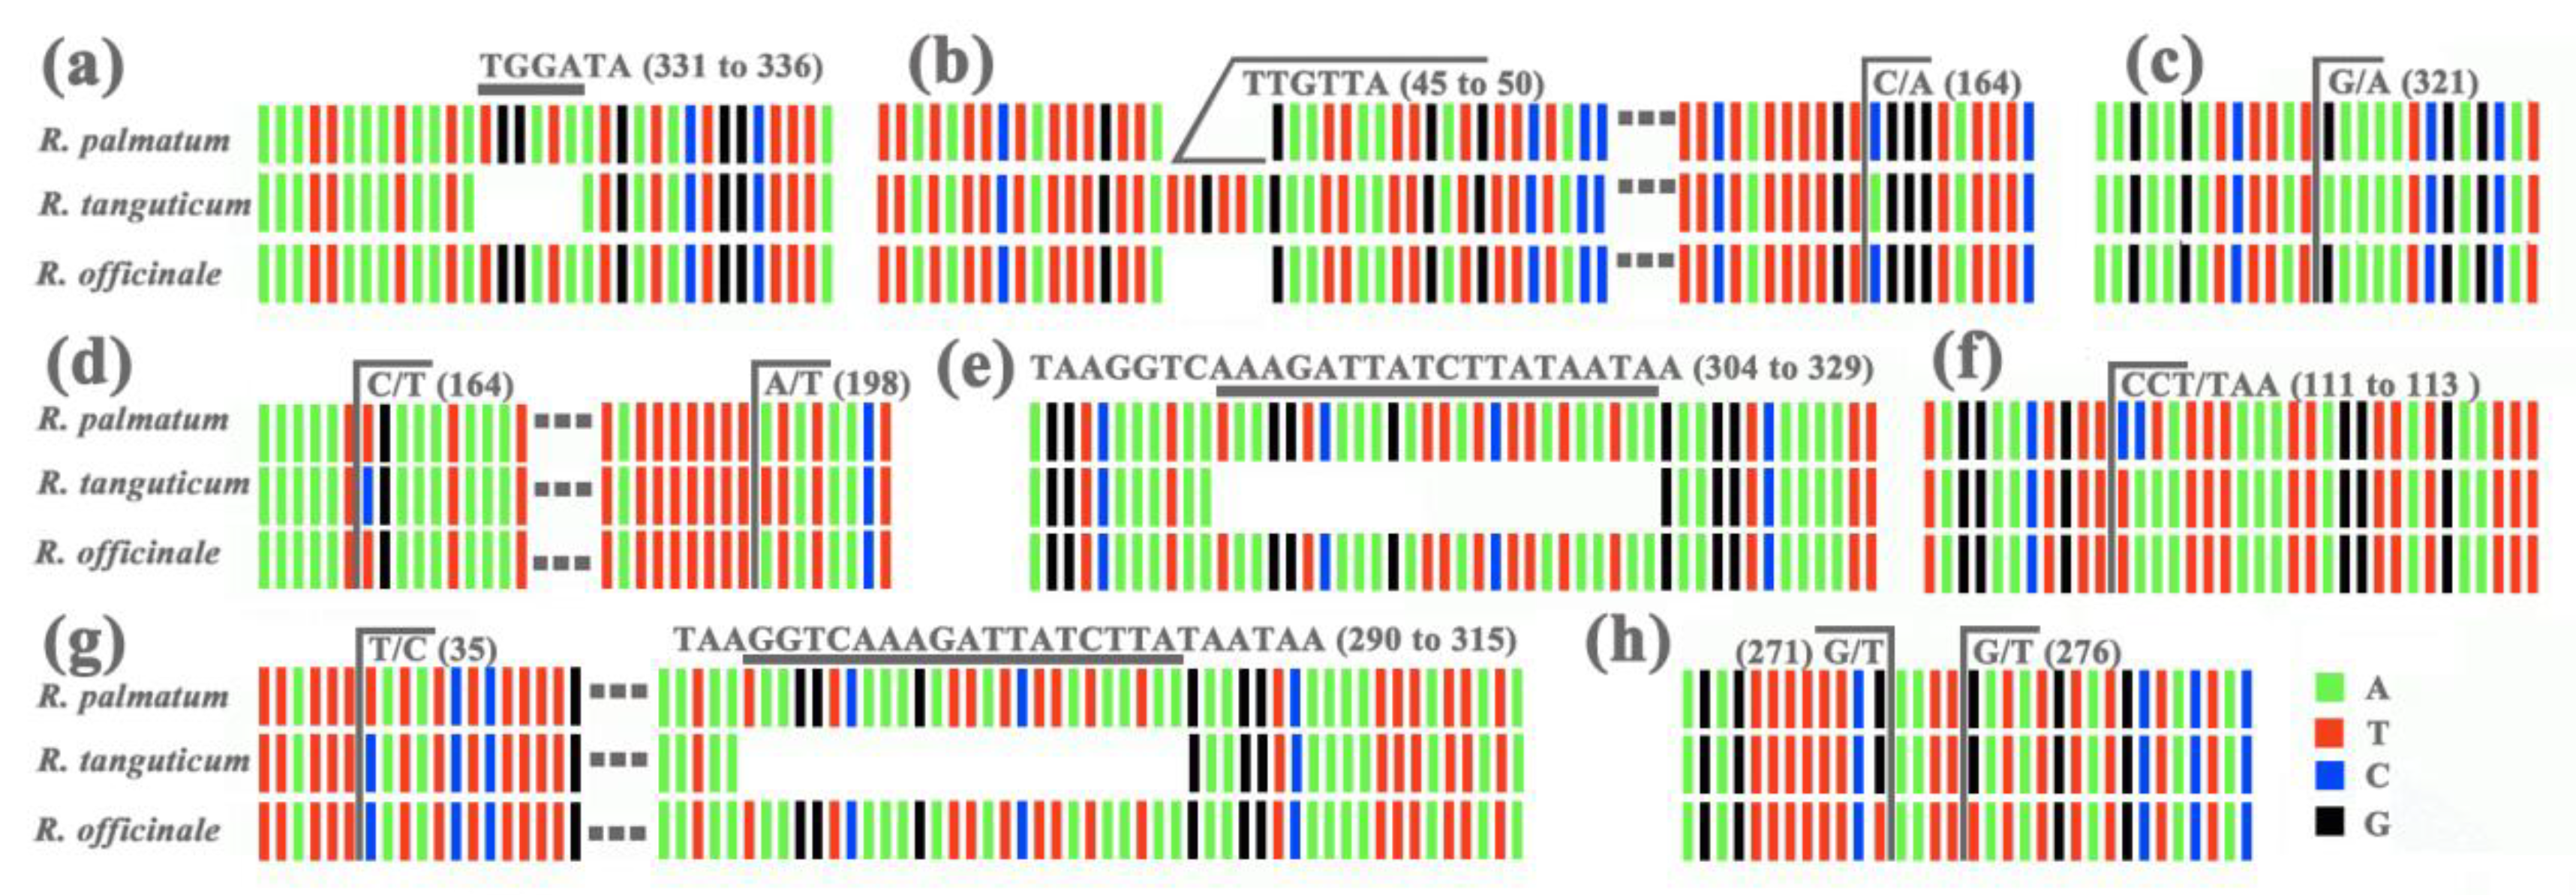 Molecules Free Full Text Comparative Chloroplast Genome Analysis Of Rhubarb Botanical Origins And The Development Of Specific Identification Markers Html